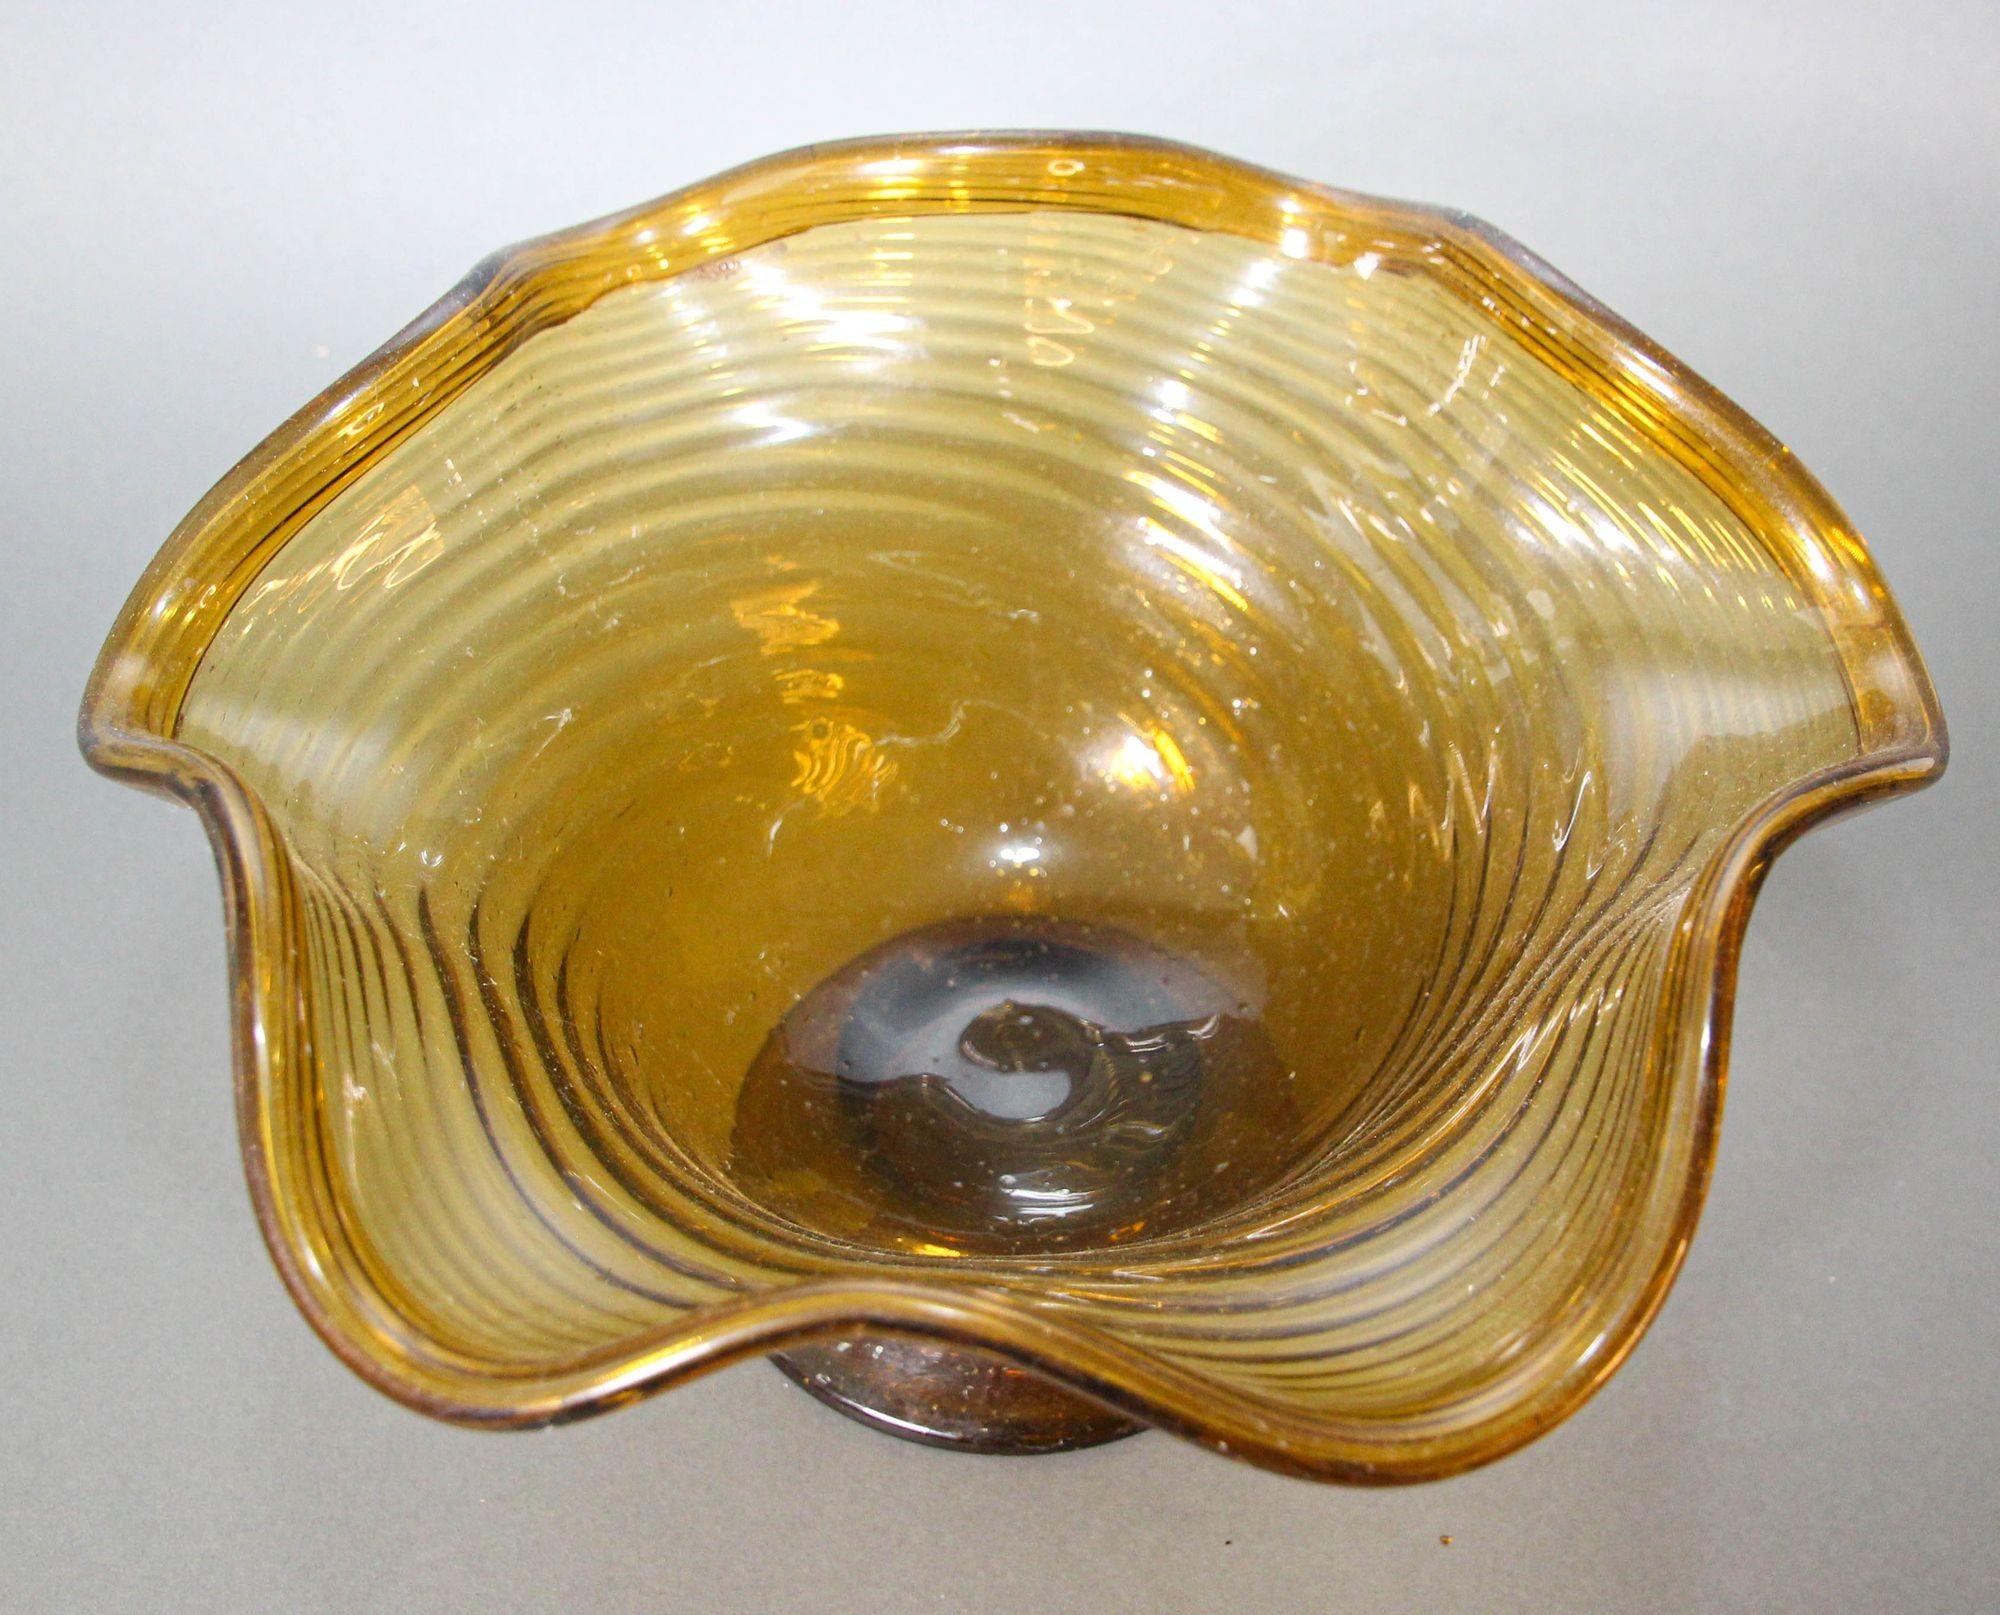 20th Century Vintage Amber Murano Art Glass Decorative Footed Fruit Bowl 1960s Italy For Sale